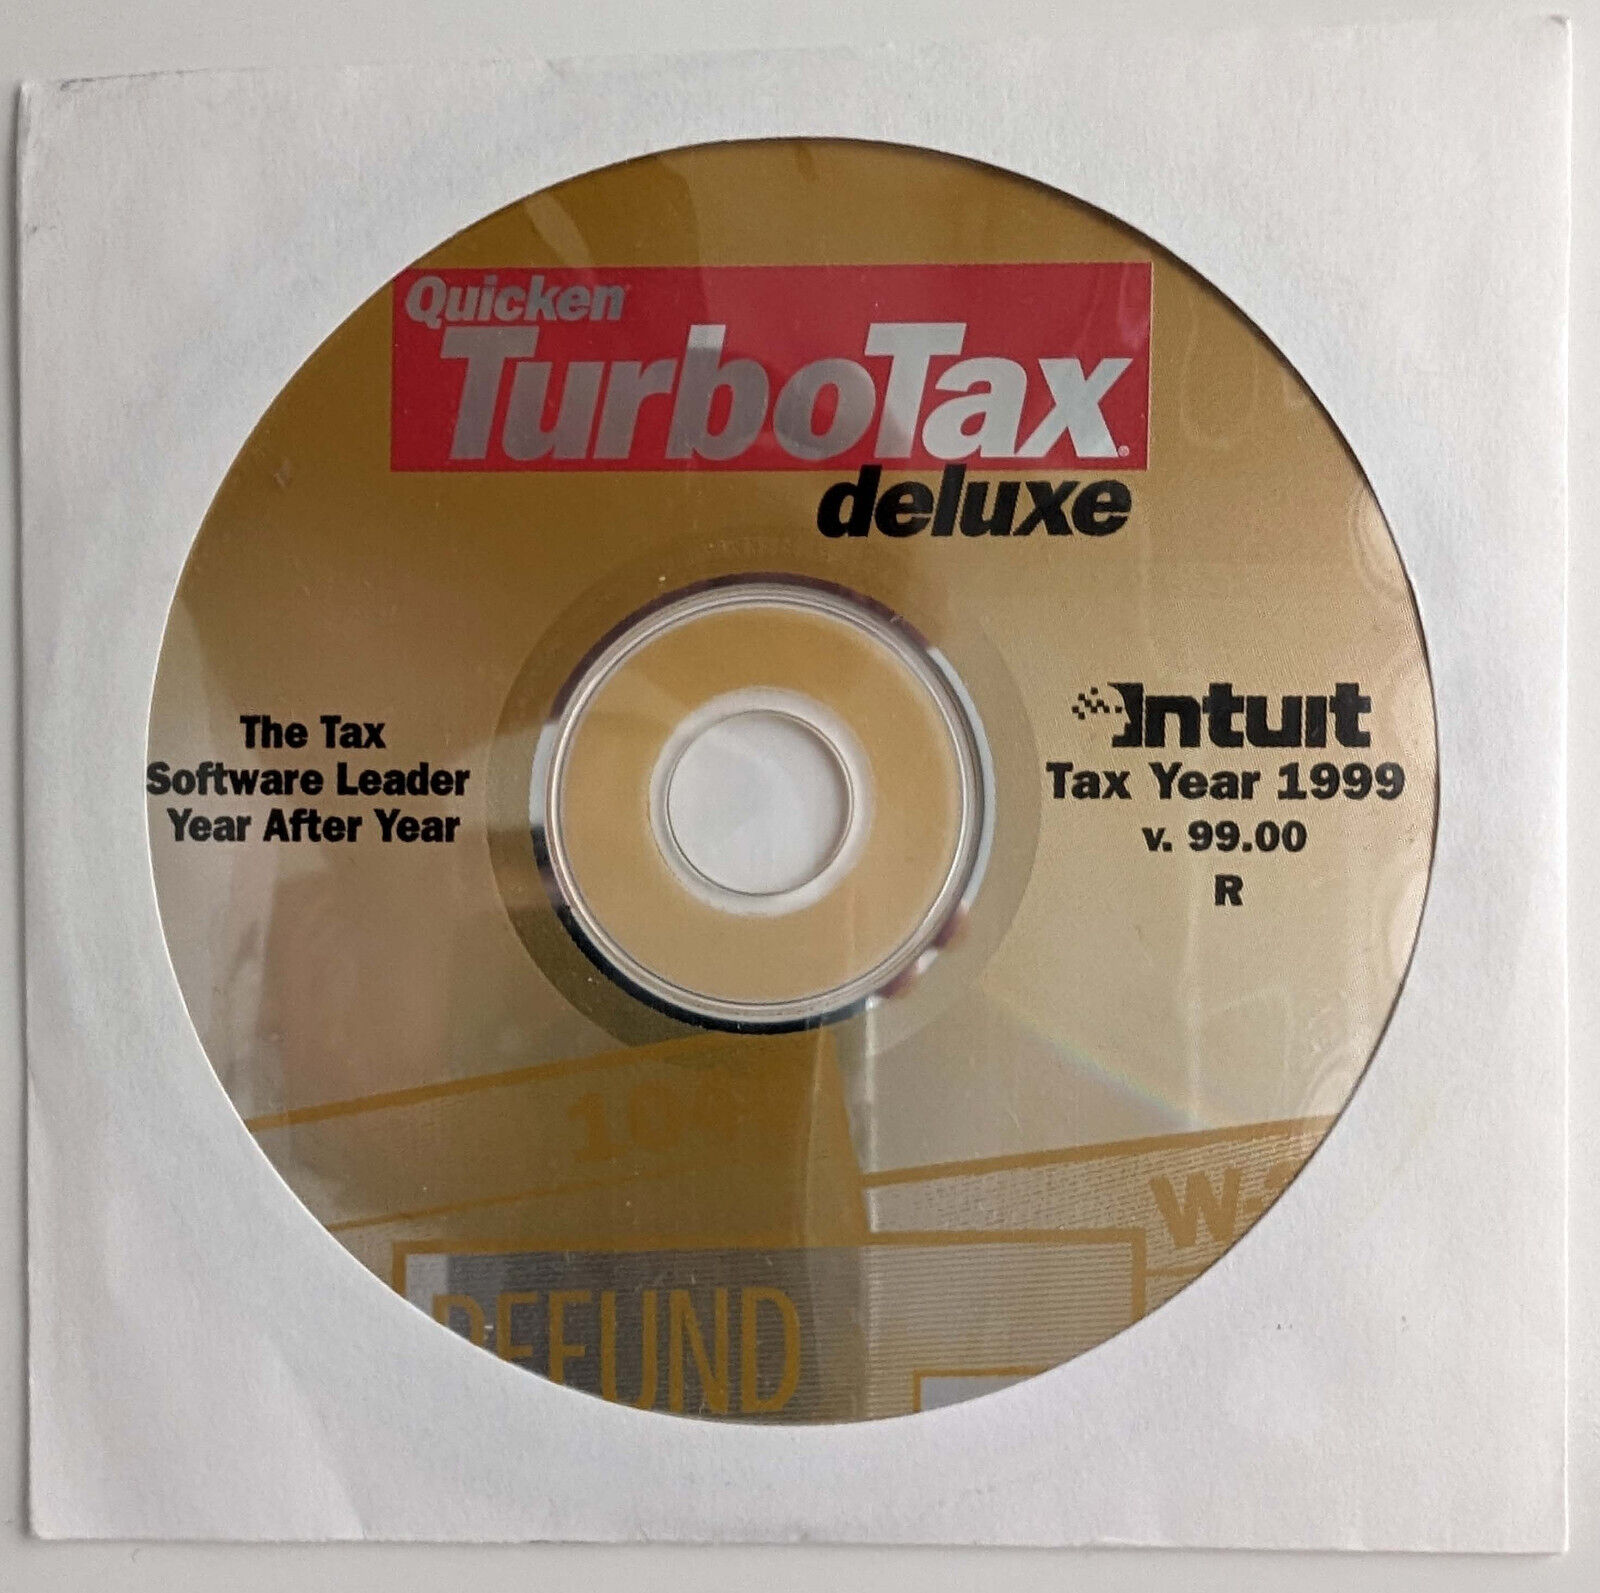 ORIGINAL Intuit Quicken TurboTax™ Deluxe Tax Year 1999 V. 99.00 R GREAT COND